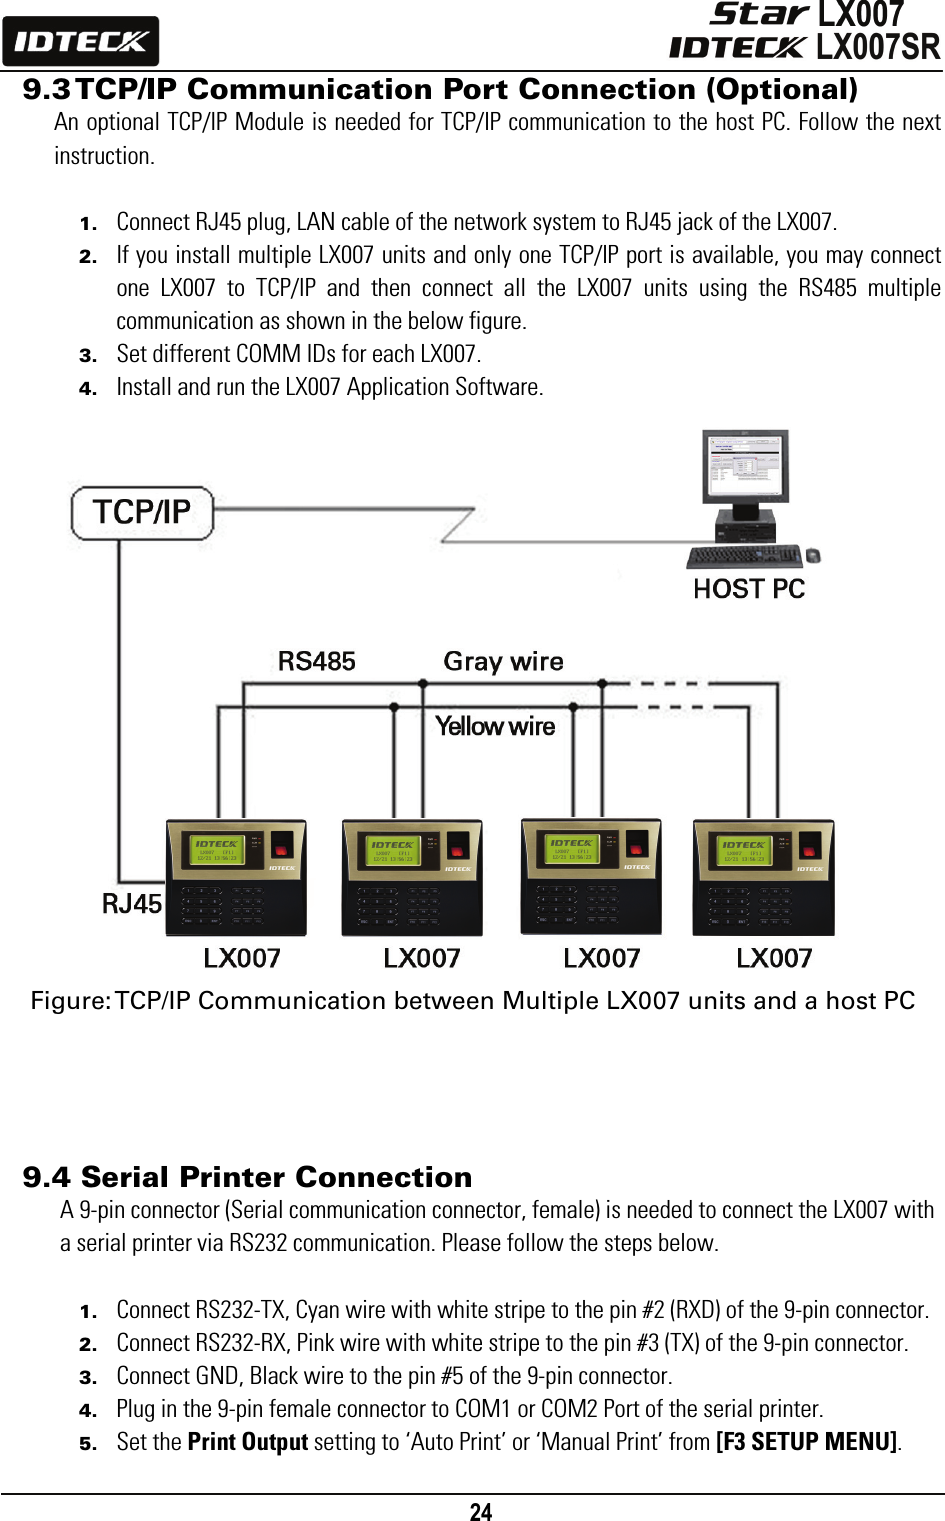                                                                                    24      9.3 TCP/IP Communication Port Connection (Optional) An optional TCP/IP Module is needed for TCP/IP communication to the host PC. Follow the next instruction.  1. Connect RJ45 plug, LAN cable of the network system to RJ45 jack of the LX007. 2. If you install multiple LX007 units and only one TCP/IP port is available, you may connect one LX007 to TCP/IP and then connect all the LX007 units using the RS485 multiple communication as shown in the below figure. 3. Set different COMM IDs for each LX007. 4. Install and run the LX007 Application Software.                     Figure: TCP/IP Communication between Multiple LX007 units and a host PC      9.4 Serial Printer Connection A 9-pin connector (Serial communication connector, female) is needed to connect the LX007 with a serial printer via RS232 communication. Please follow the steps below.  1. Connect RS232-TX, Cyan wire with white stripe to the pin #2 (RXD) of the 9-pin connector. 2. Connect RS232-RX, Pink wire with white stripe to the pin #3 (TX) of the 9-pin connector. 3. Connect GND, Black wire to the pin #5 of the 9-pin connector. 4. Plug in the 9-pin female connector to COM1 or COM2 Port of the serial printer. 5. Set the Print Output setting to ‘Auto Print’ or ‘Manual Print’ from [F3 SETUP MENU]. 